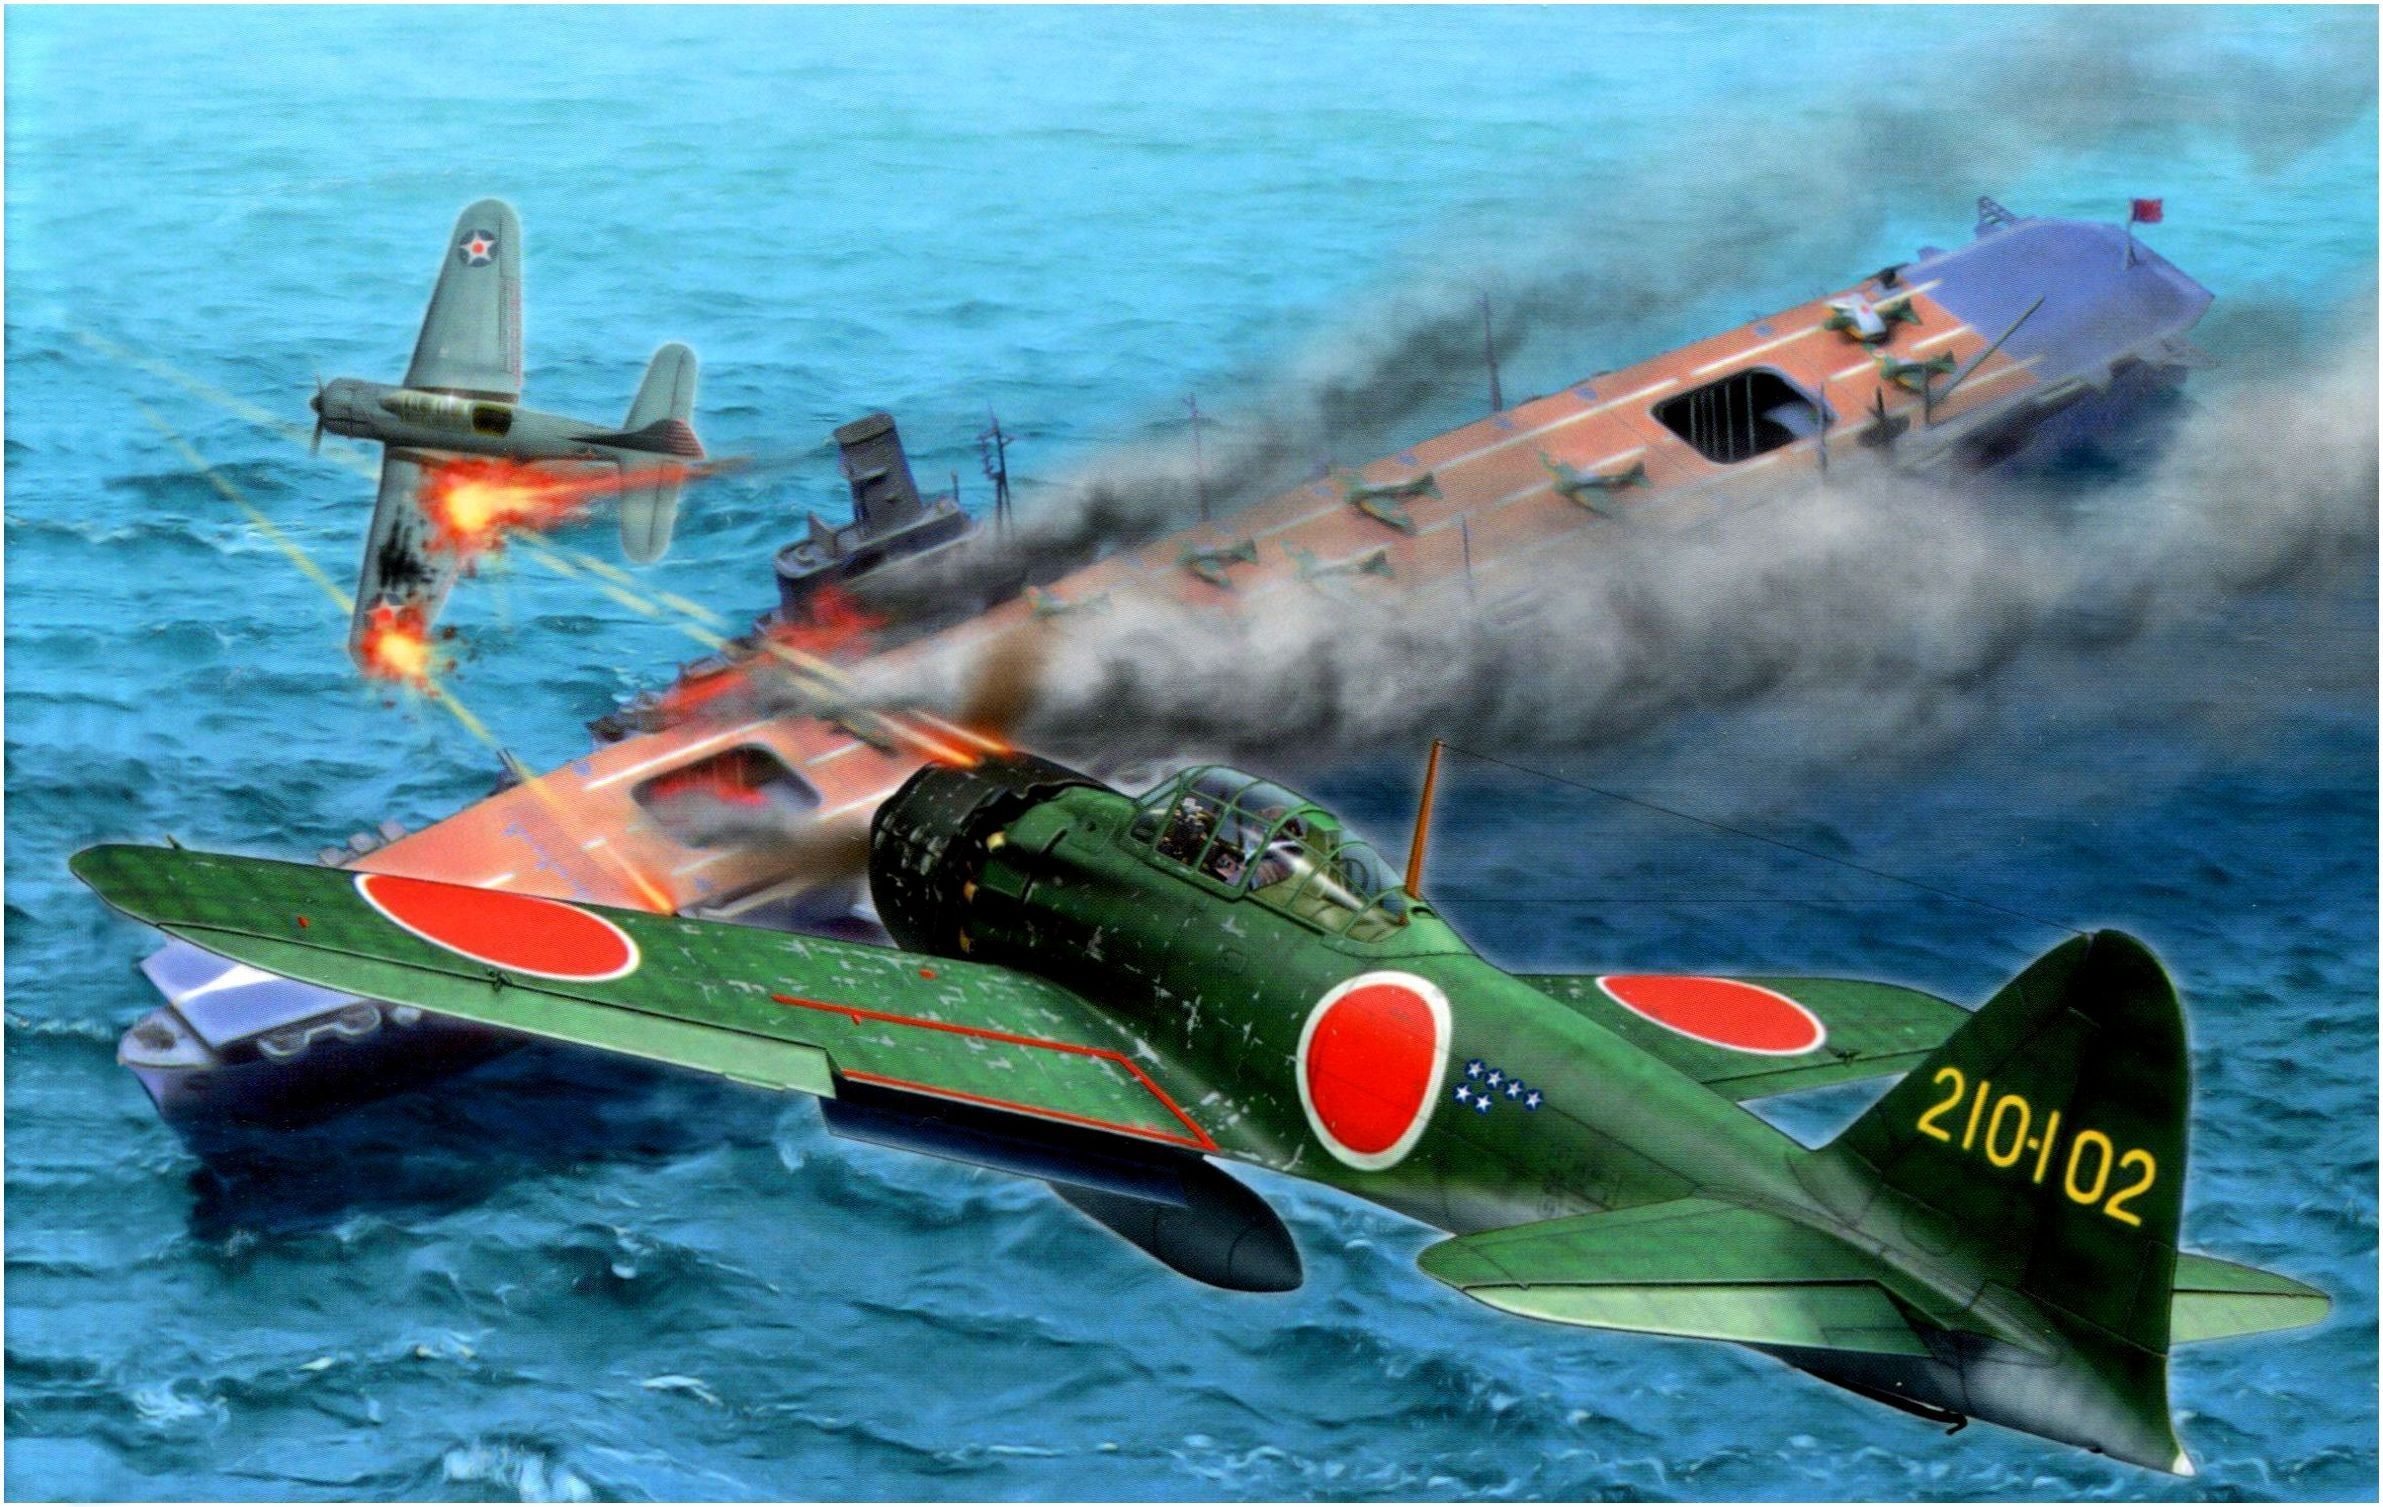 General 2383x1507 World War II Mitsubishi airplane military military aircraft aircraft artwork aircraft carrier vehicle ship dogfight numbers military vehicle Japanese aircraft